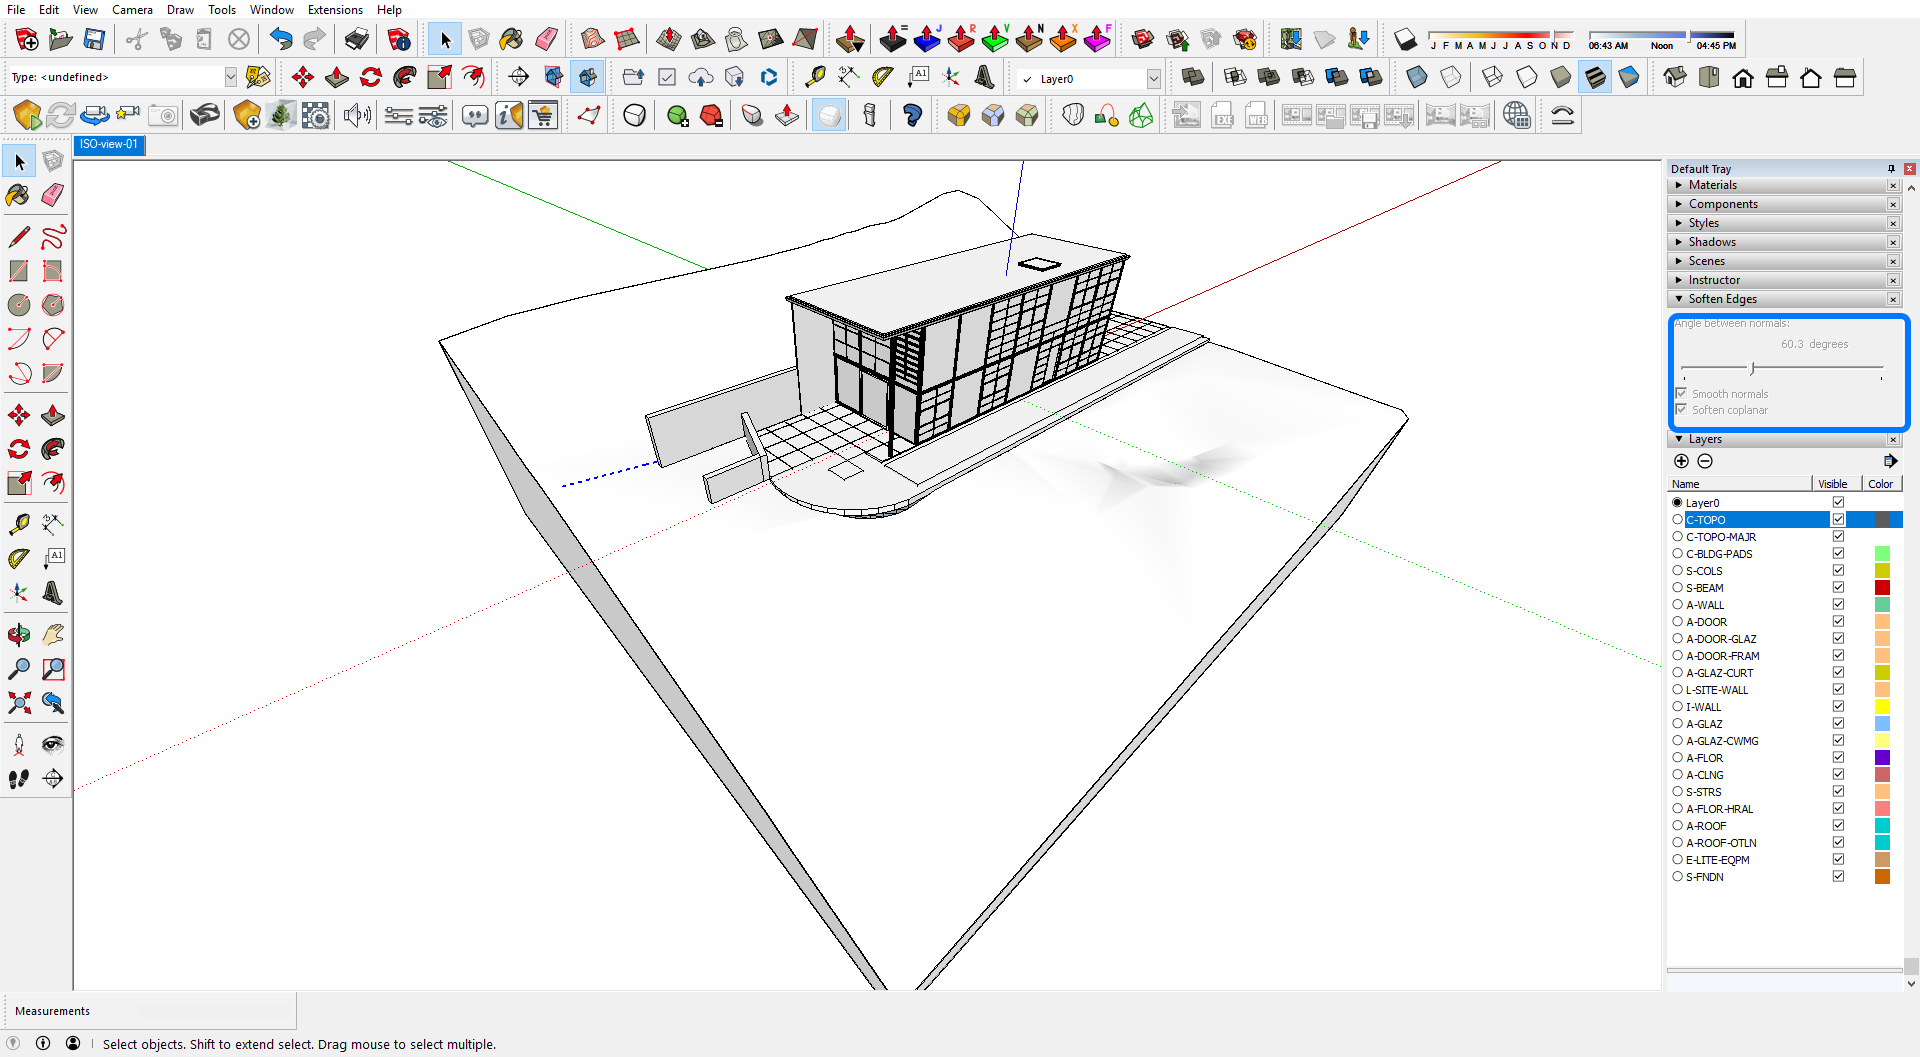 It shows how to set the soften edges tool in SketchUp to hide triangle lines.